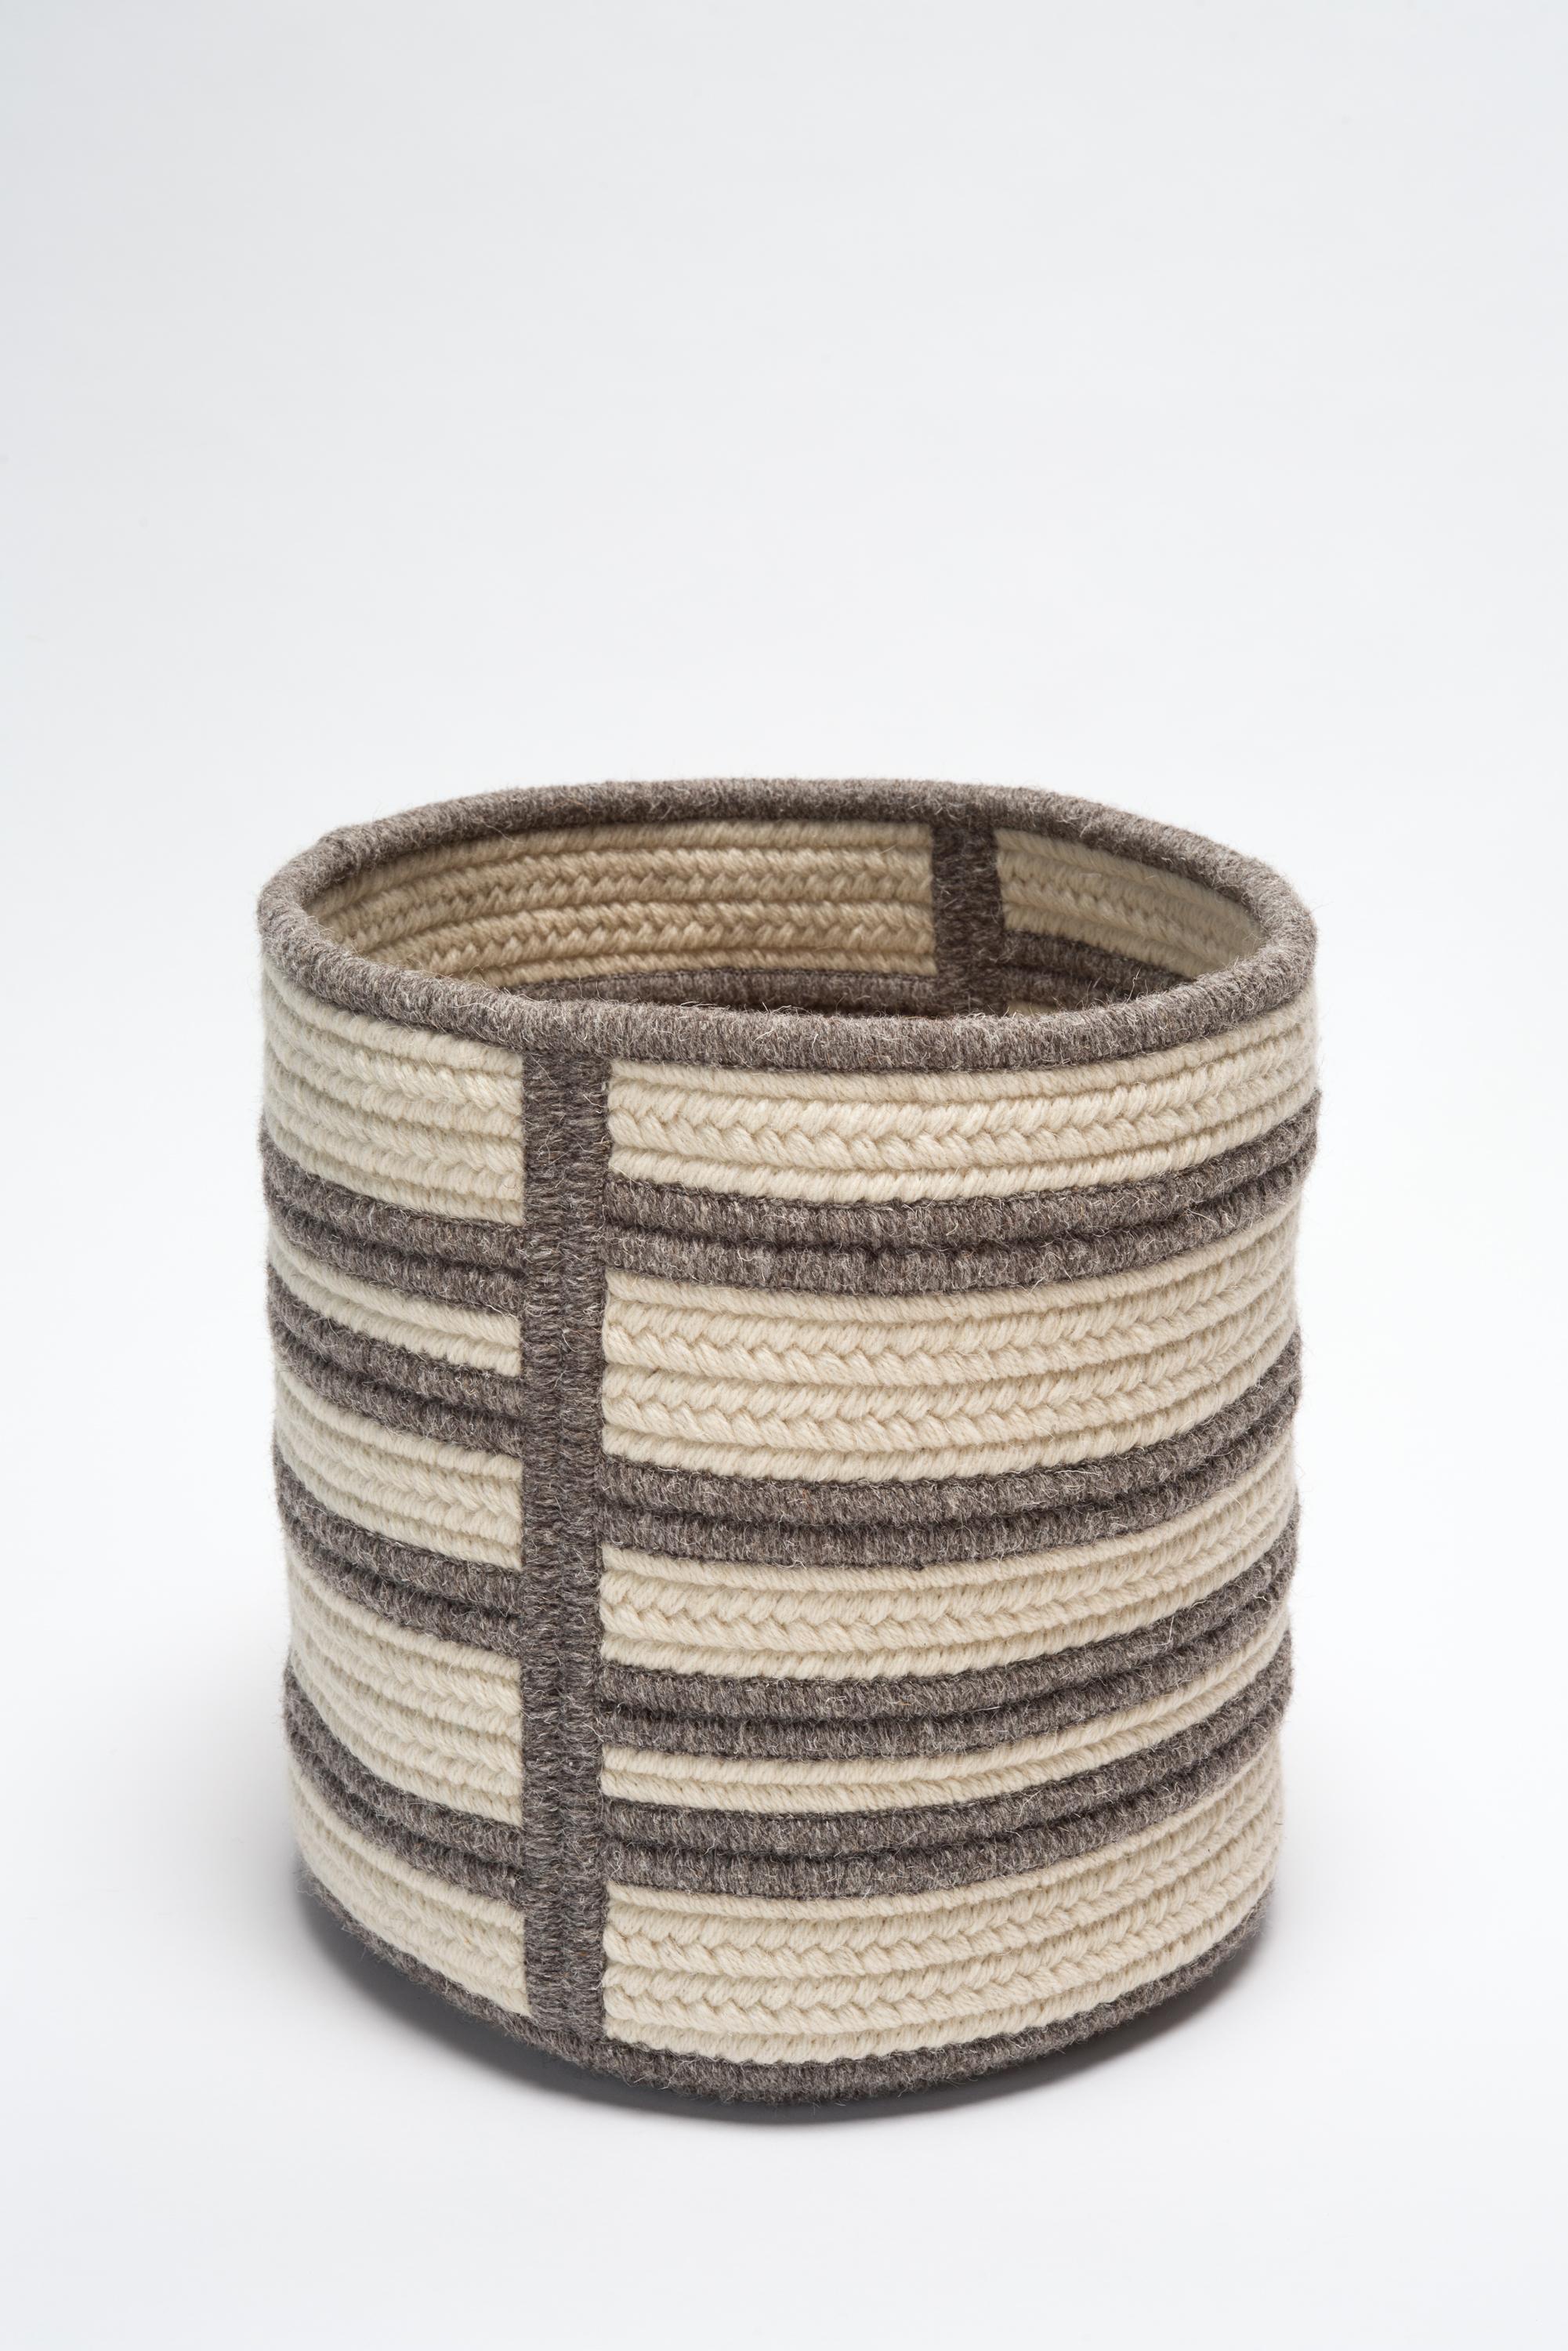 American Woven Wool Basket in Navy and White, Custom Crafted in the USA, Raised Line  For Sale